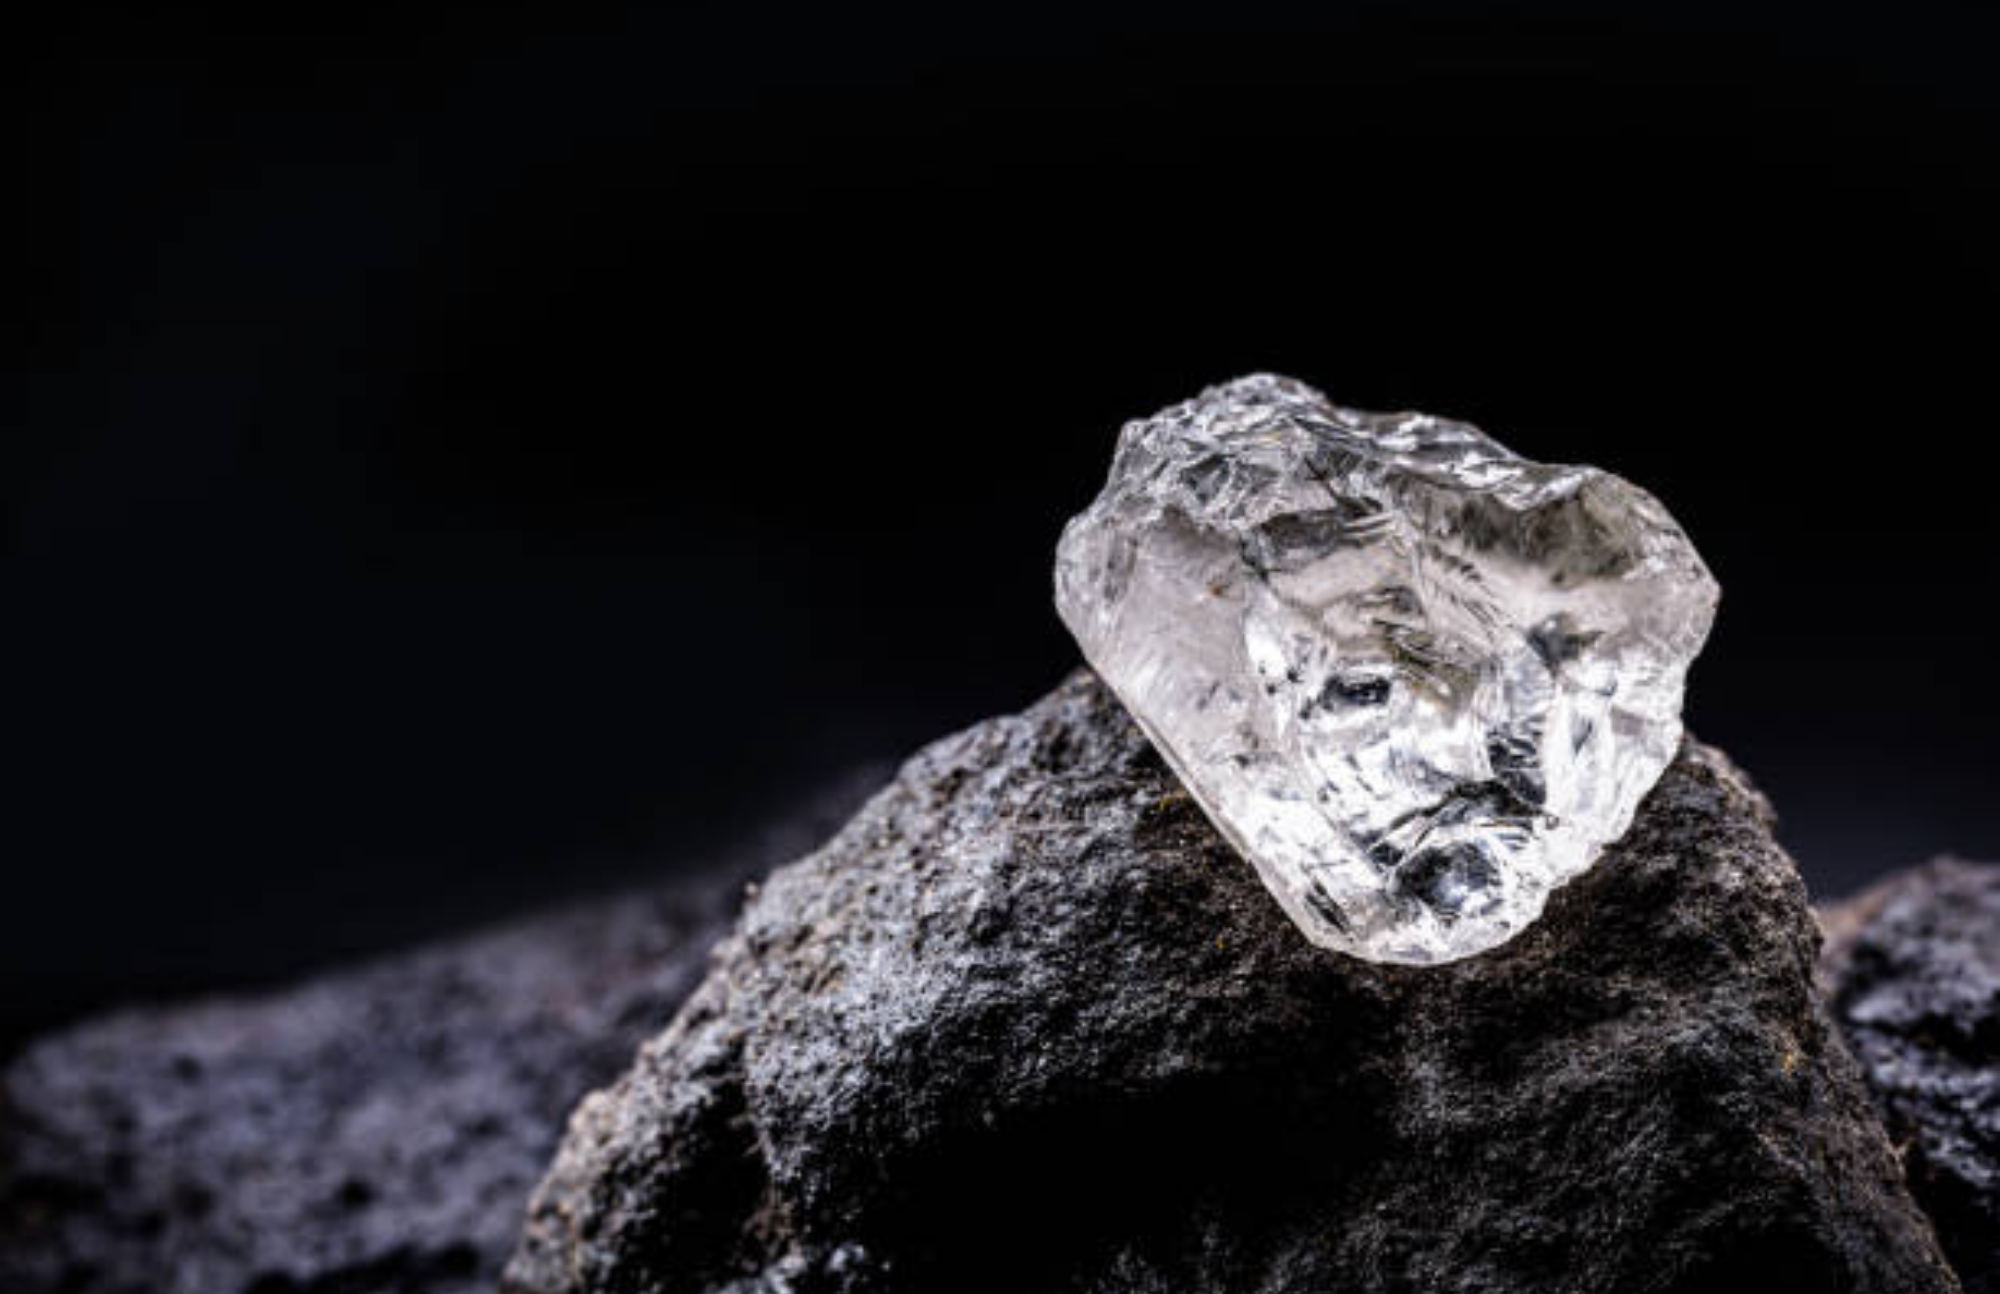 A clear diamond stone rests on a rock